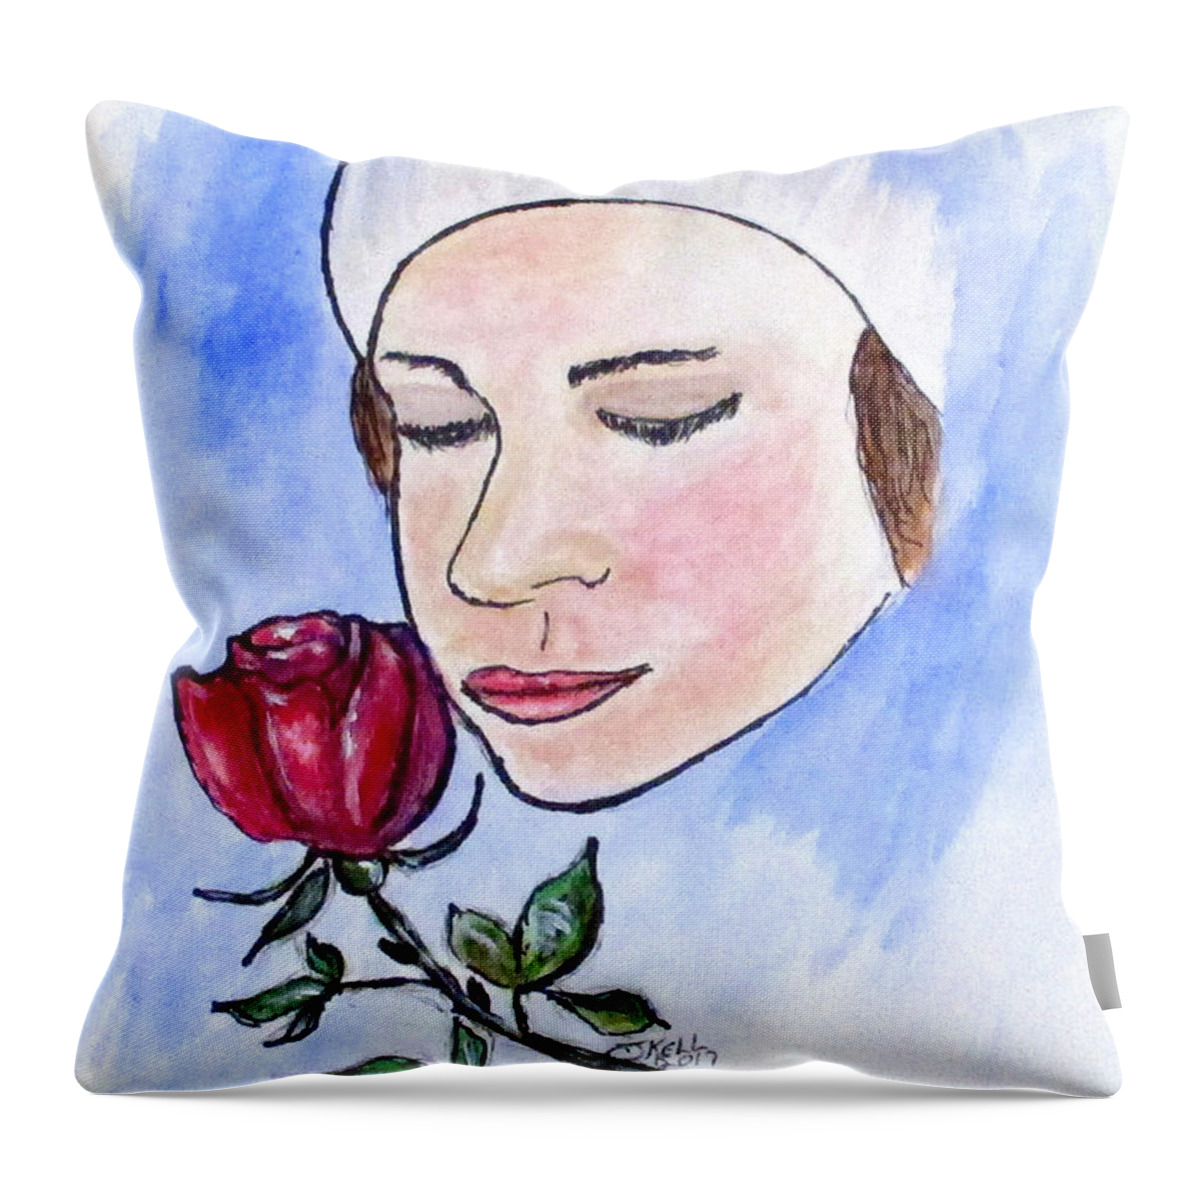 Rose Throw Pillow featuring the painting Winter Rose by Clyde J Kell